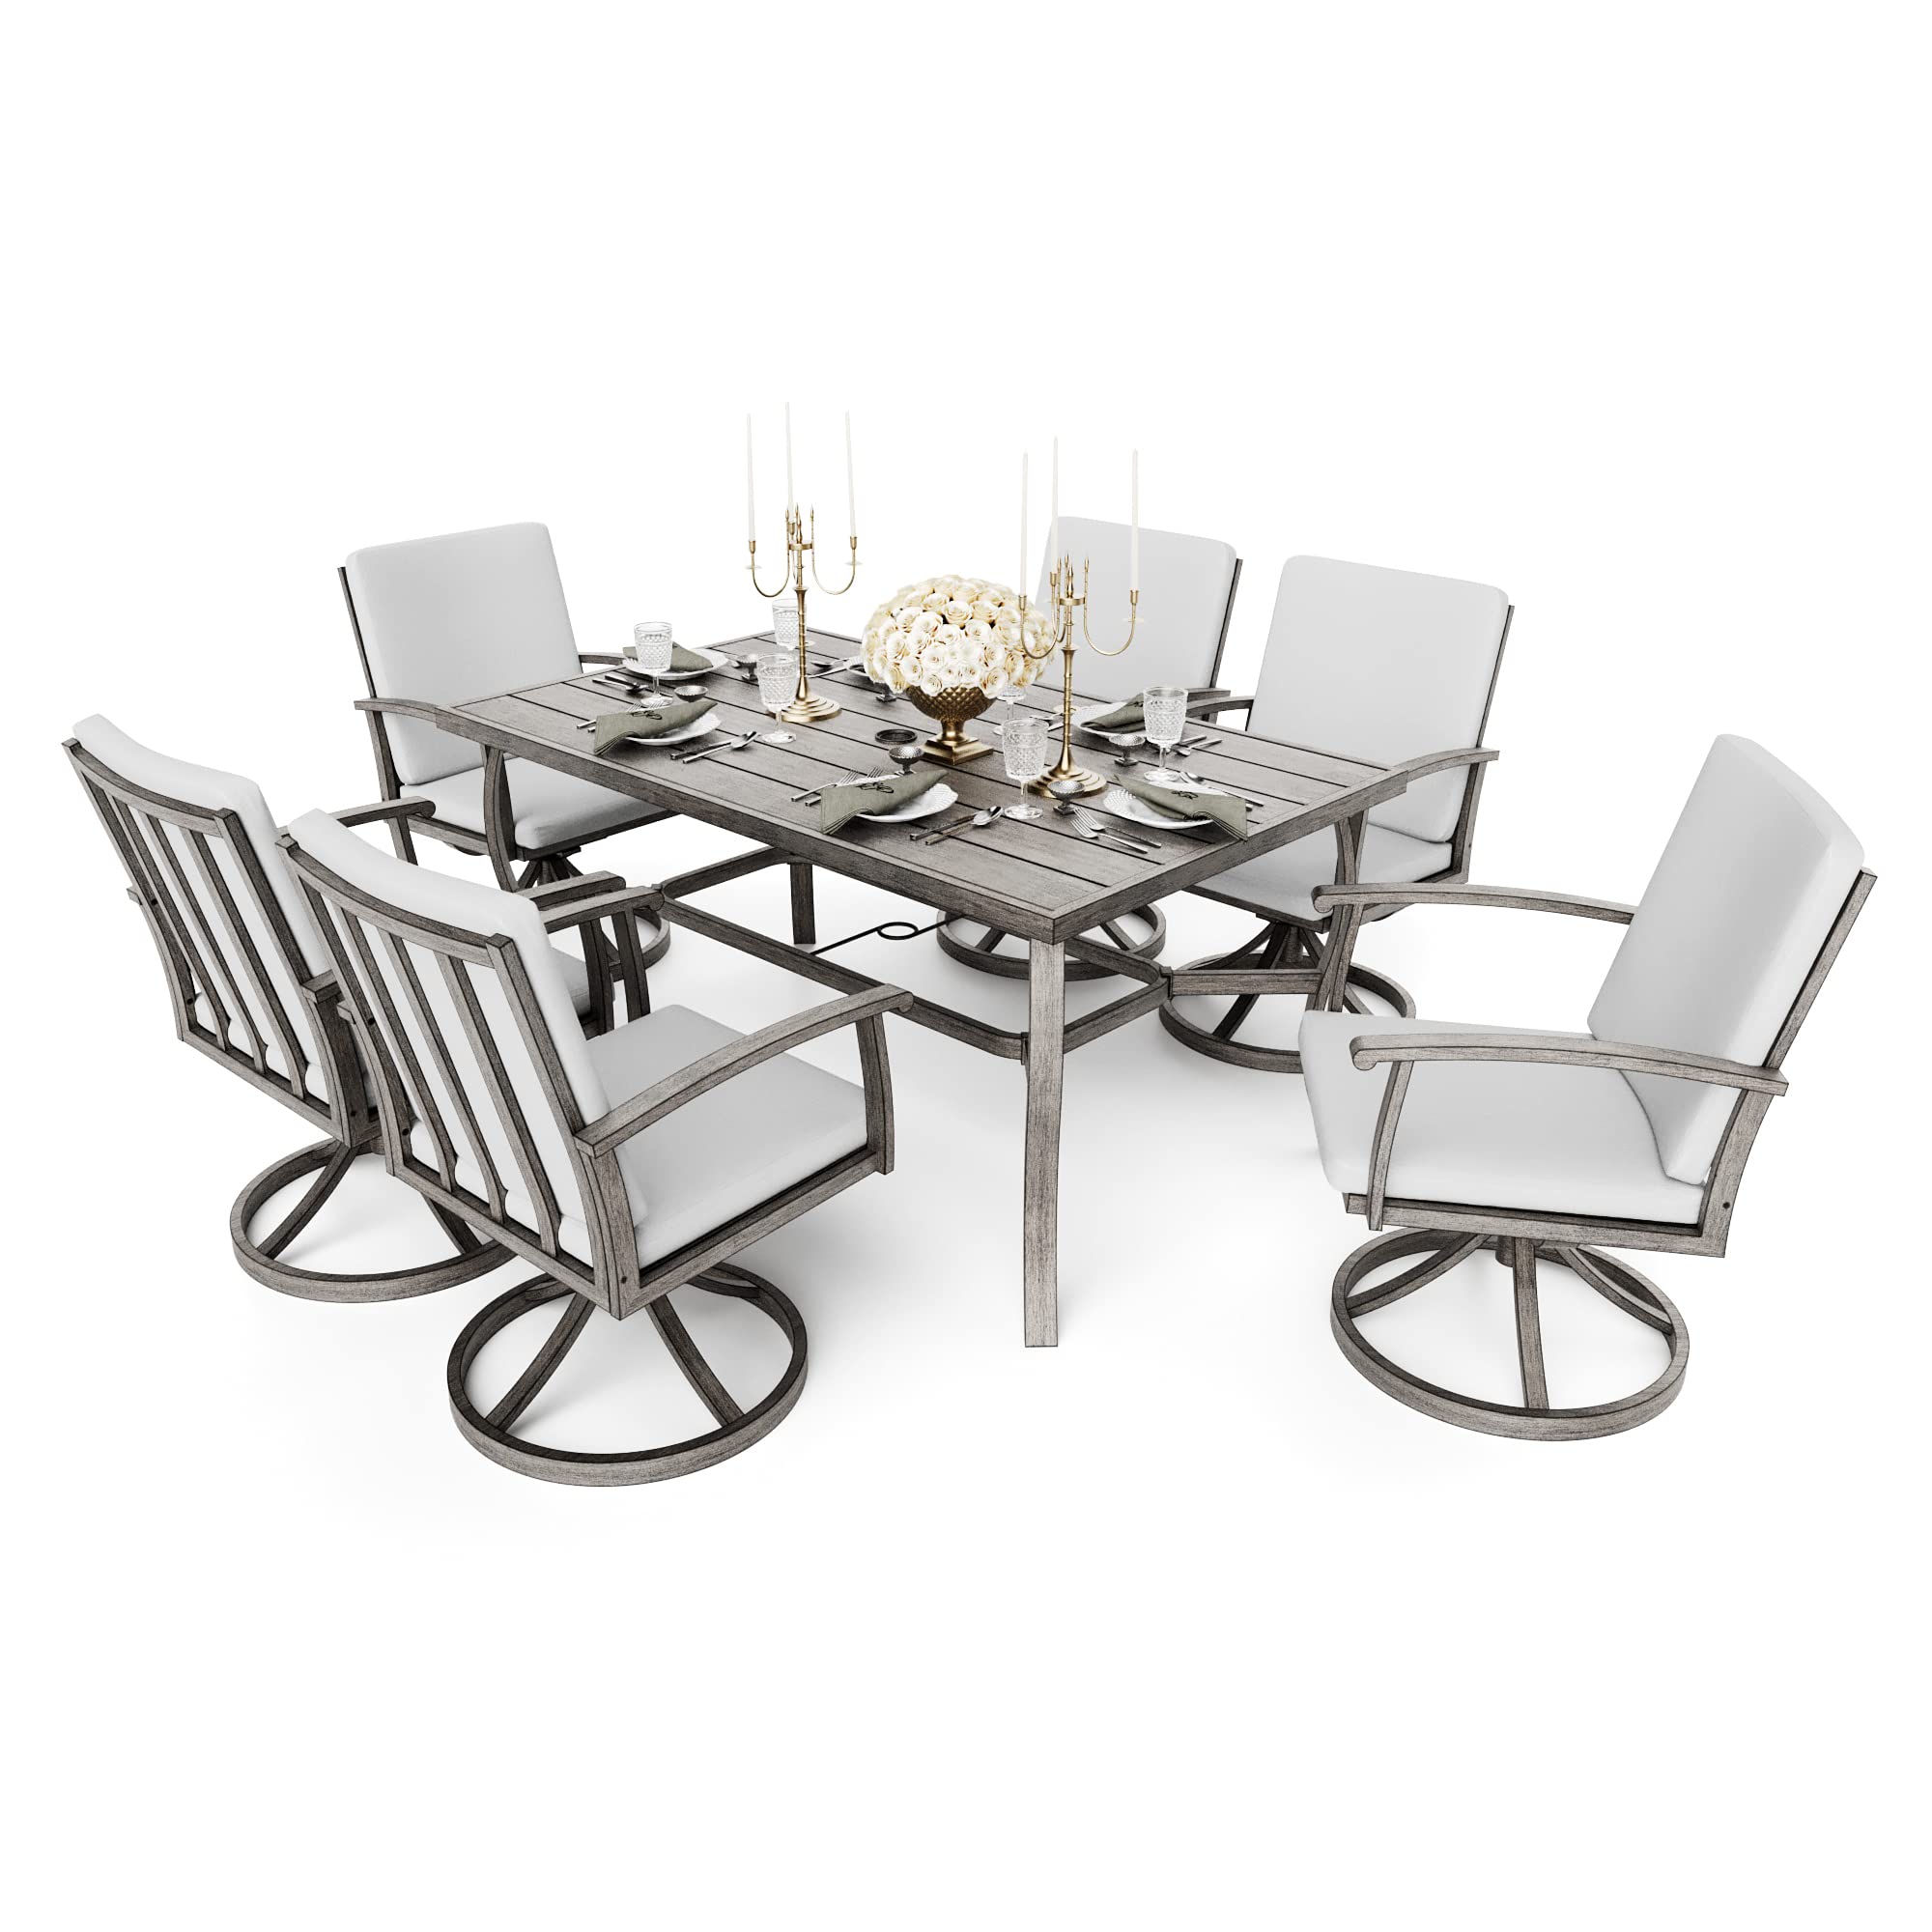 HAPPATIO 7 Piece Patio Swivel Dining Set, Aluminum Outdoor Dining Set for 6, Aluminum Dining Table and Chairs Set, Patio Dining Furniture with Aluminum Table, Chairs and Washable Cushions (Gray)